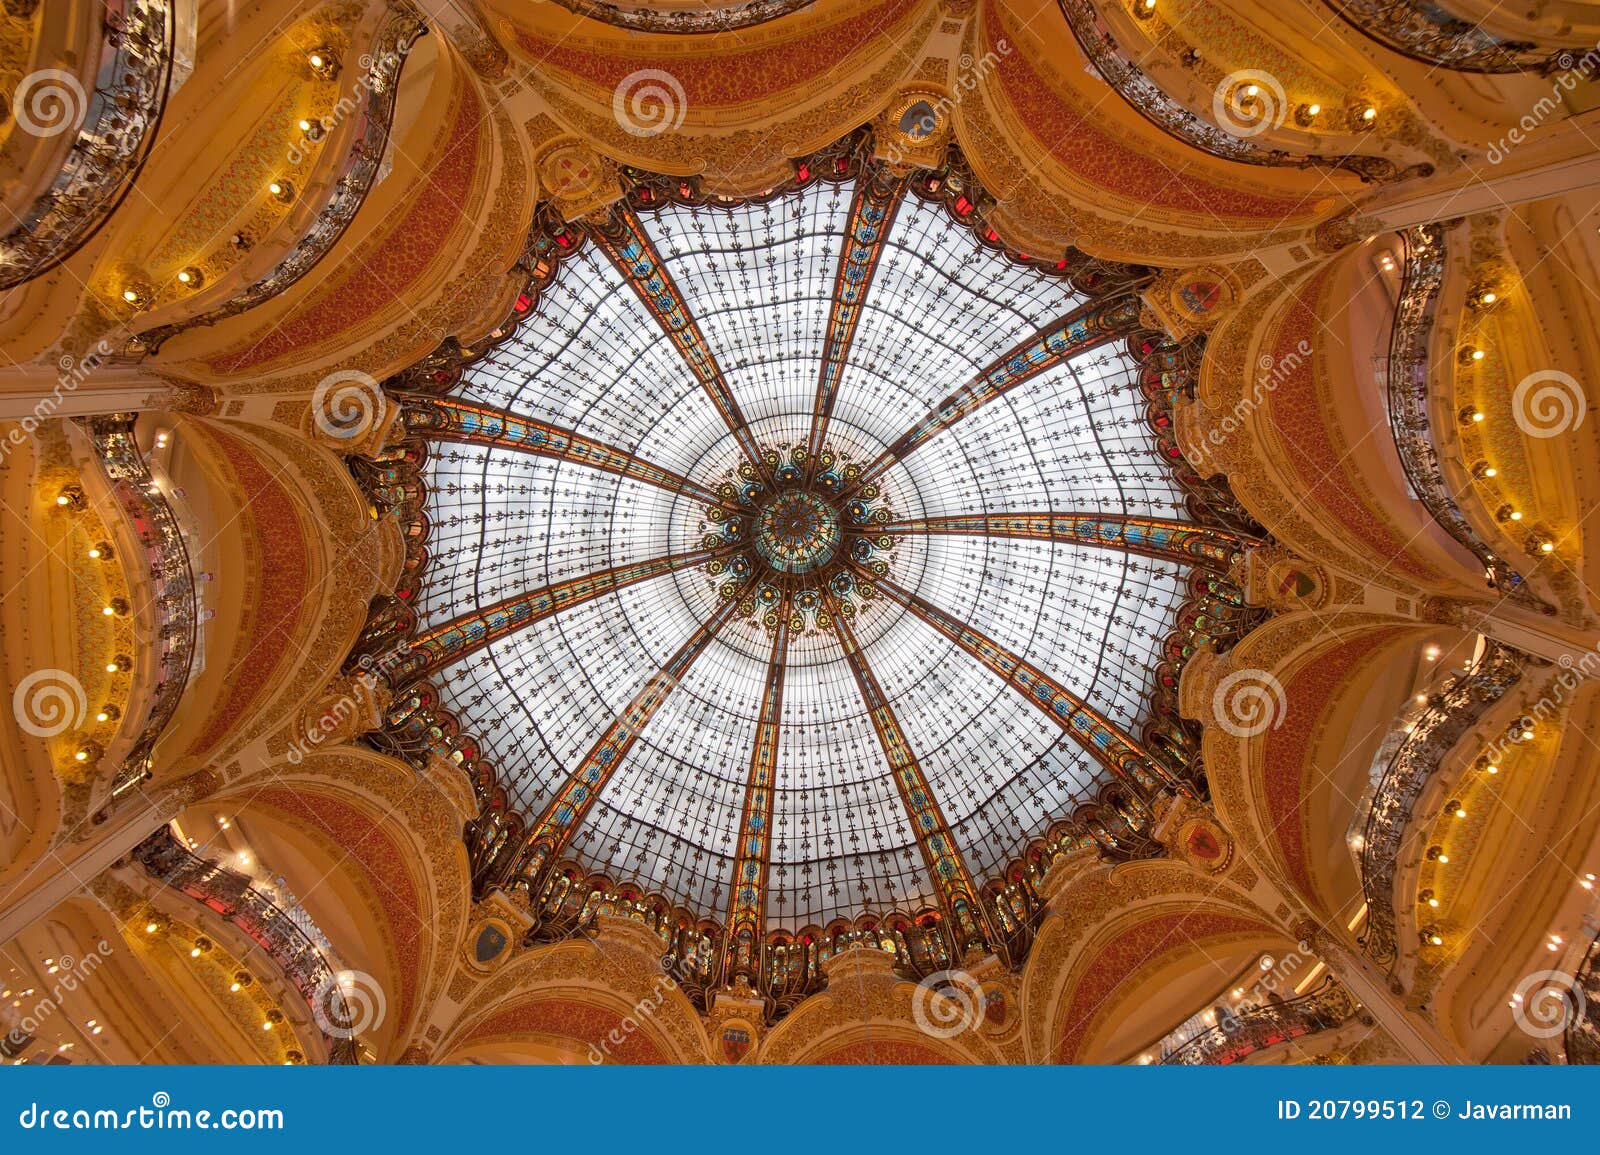 Dome Of Galeries Lafayette Paris France Stock Photo Image Of